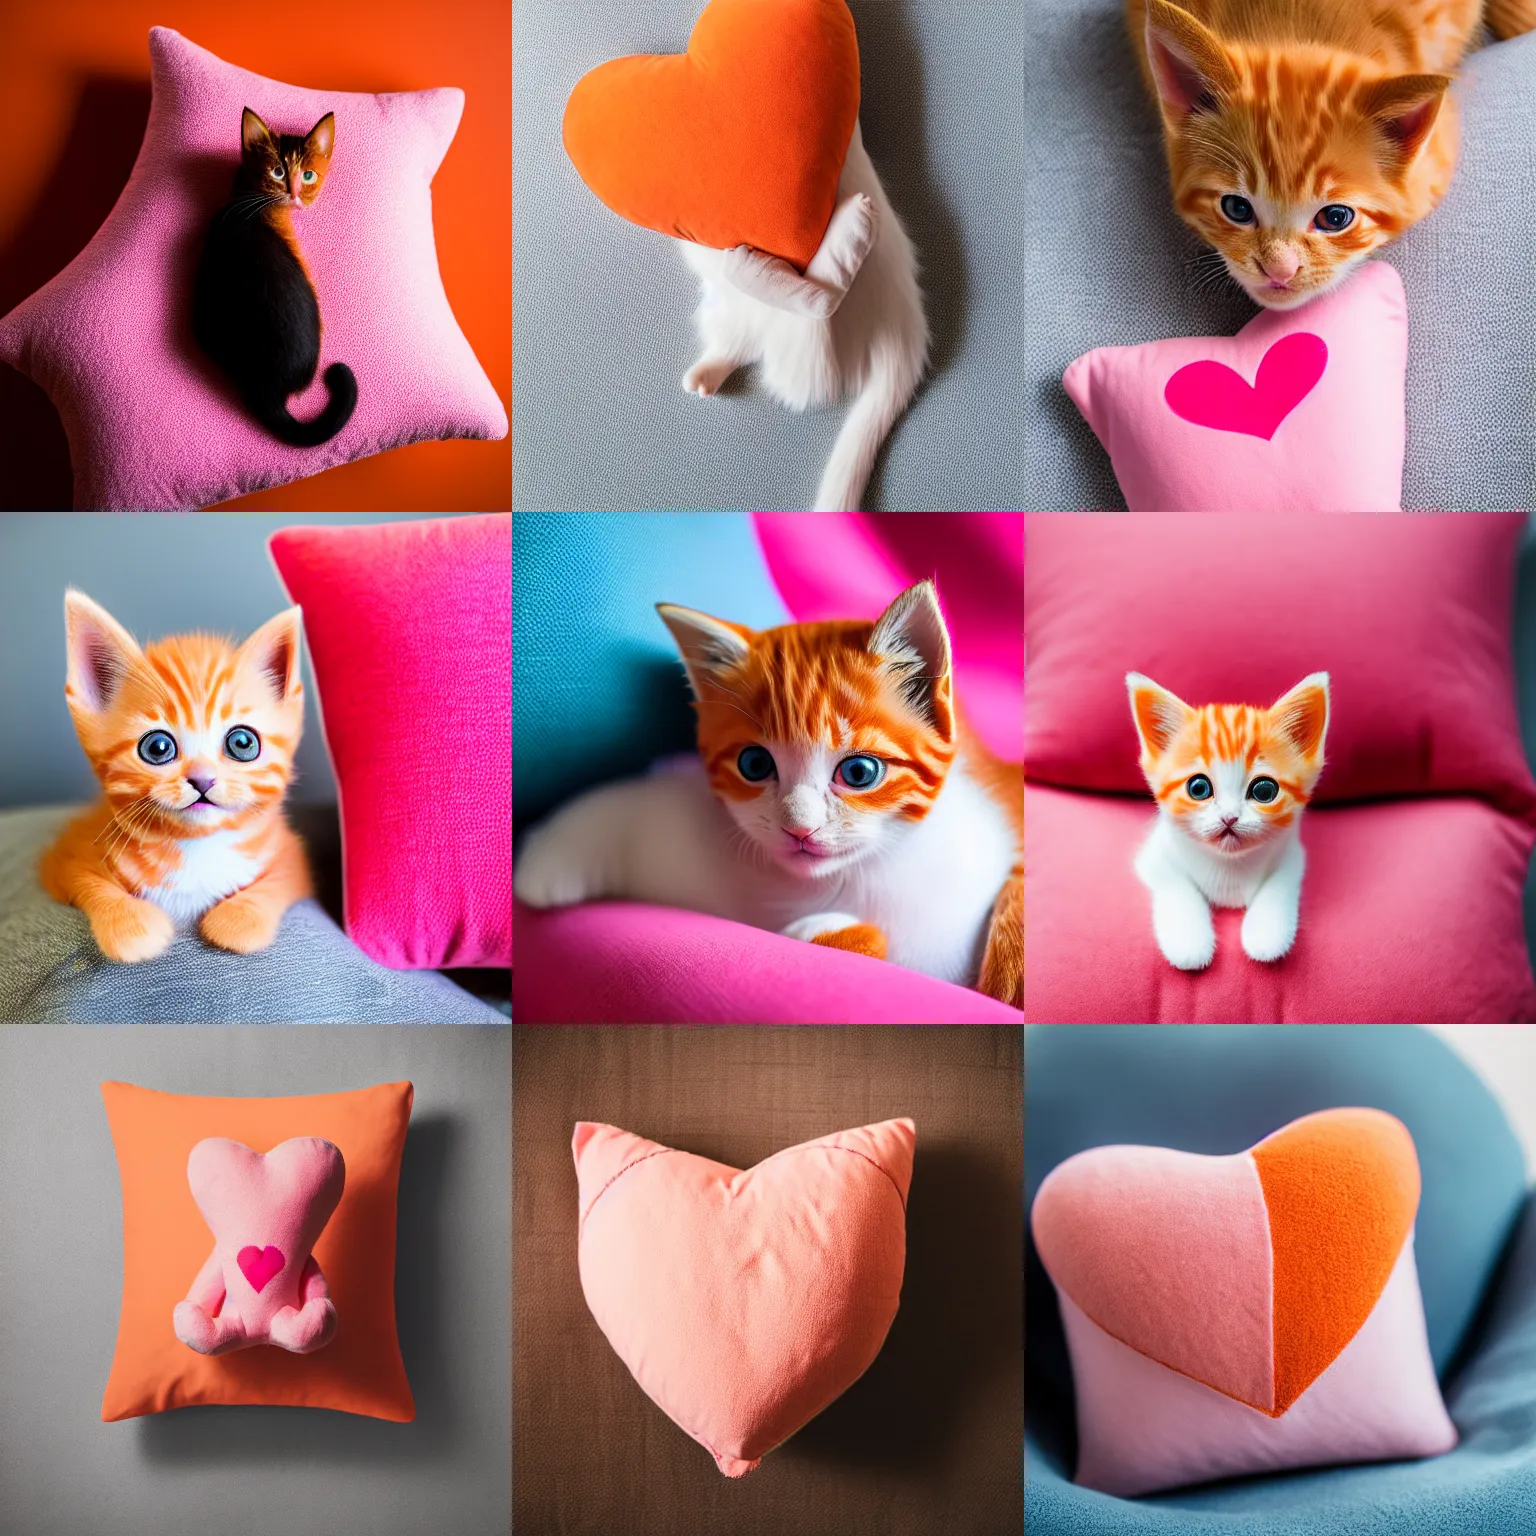 Prompt: A cute little orange kitten sits on a plush pink heart-shaped pillow, Canon EOS R3, f/1.4, ISO 200, 1/160s, 8K, RAW, unedited, symmetrical balance, in-frame